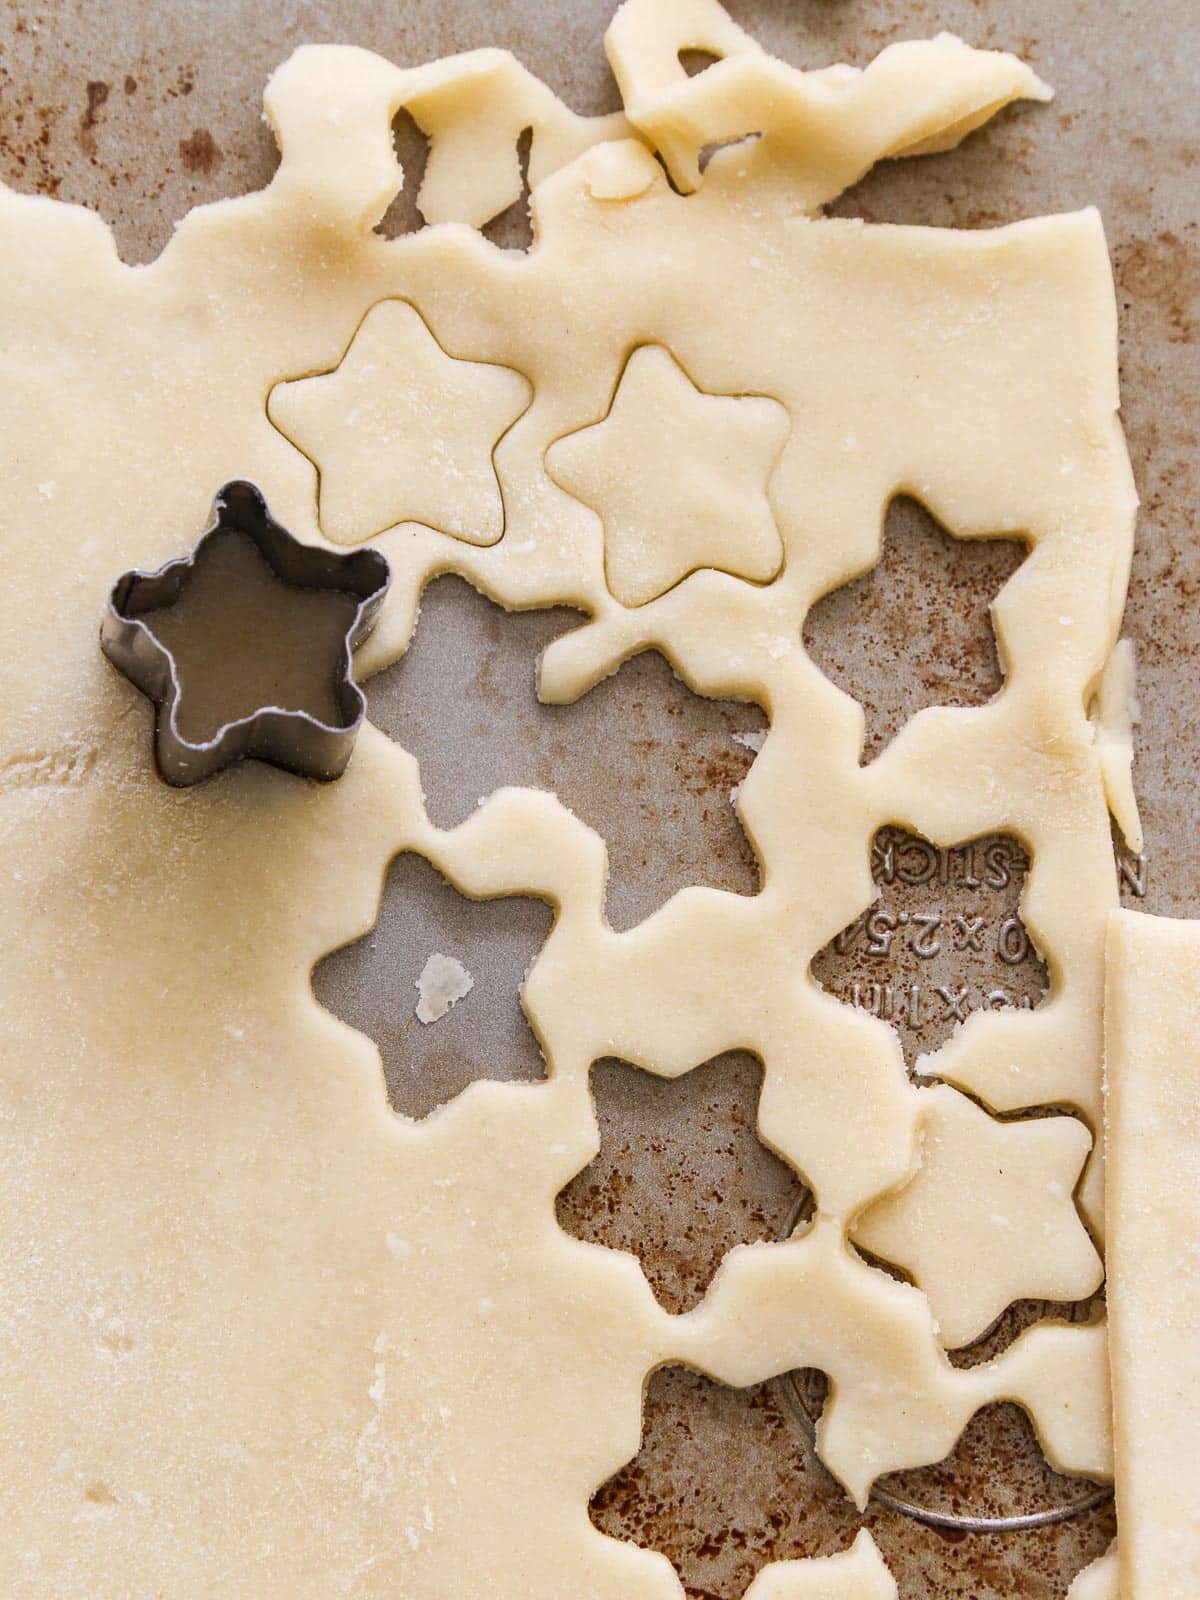 Cutting stars from pie dough to decorate a flag pie.